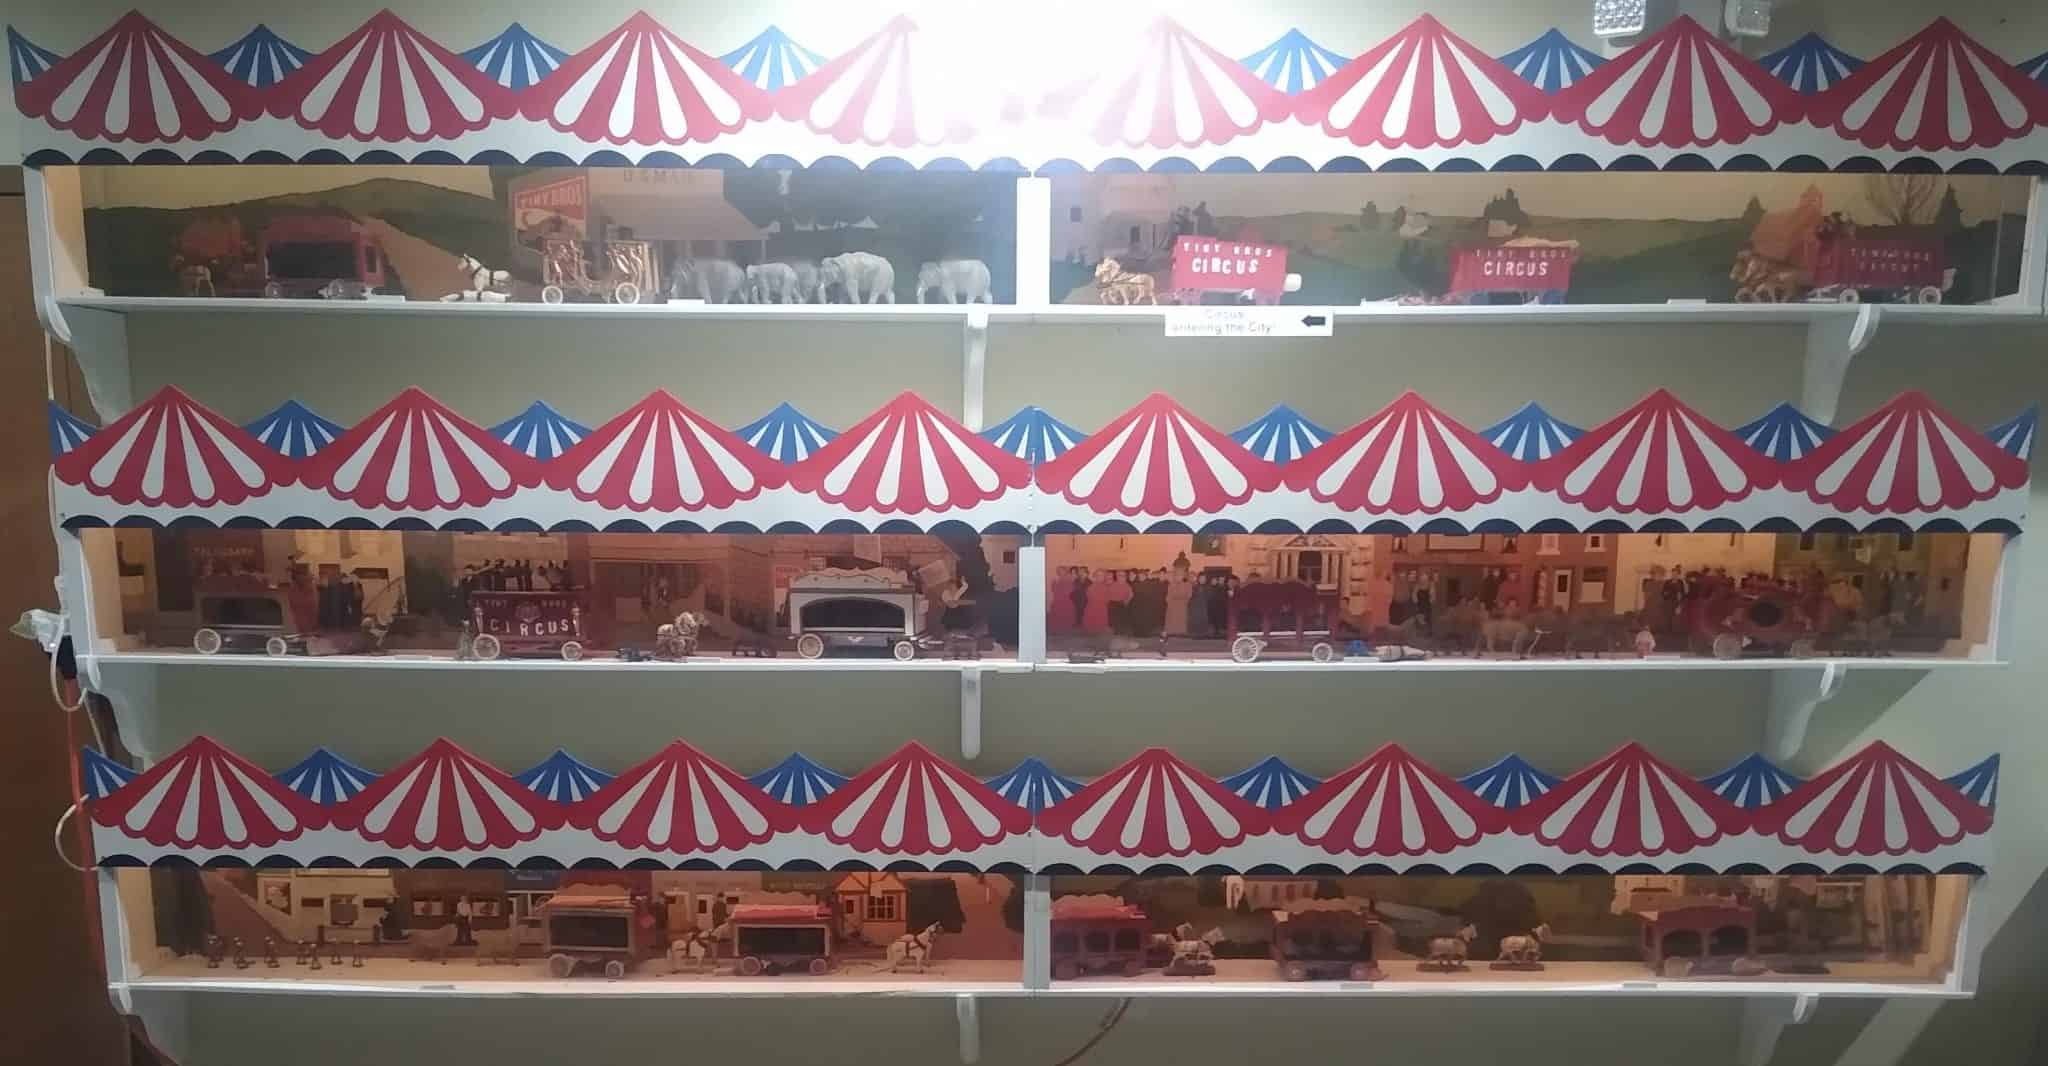 After 60-year journey, Vera Meyer’s one-of-a-kind circus display finds home in Tomahawk